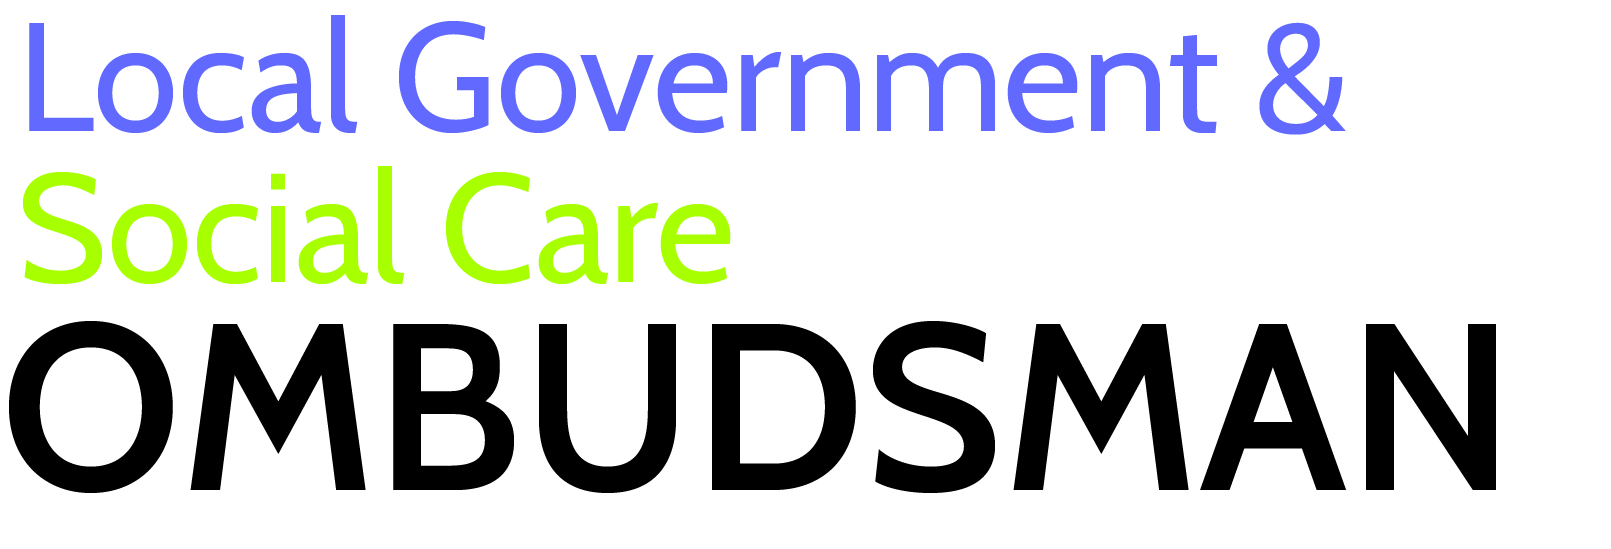 Local government and social care ombudsman logo